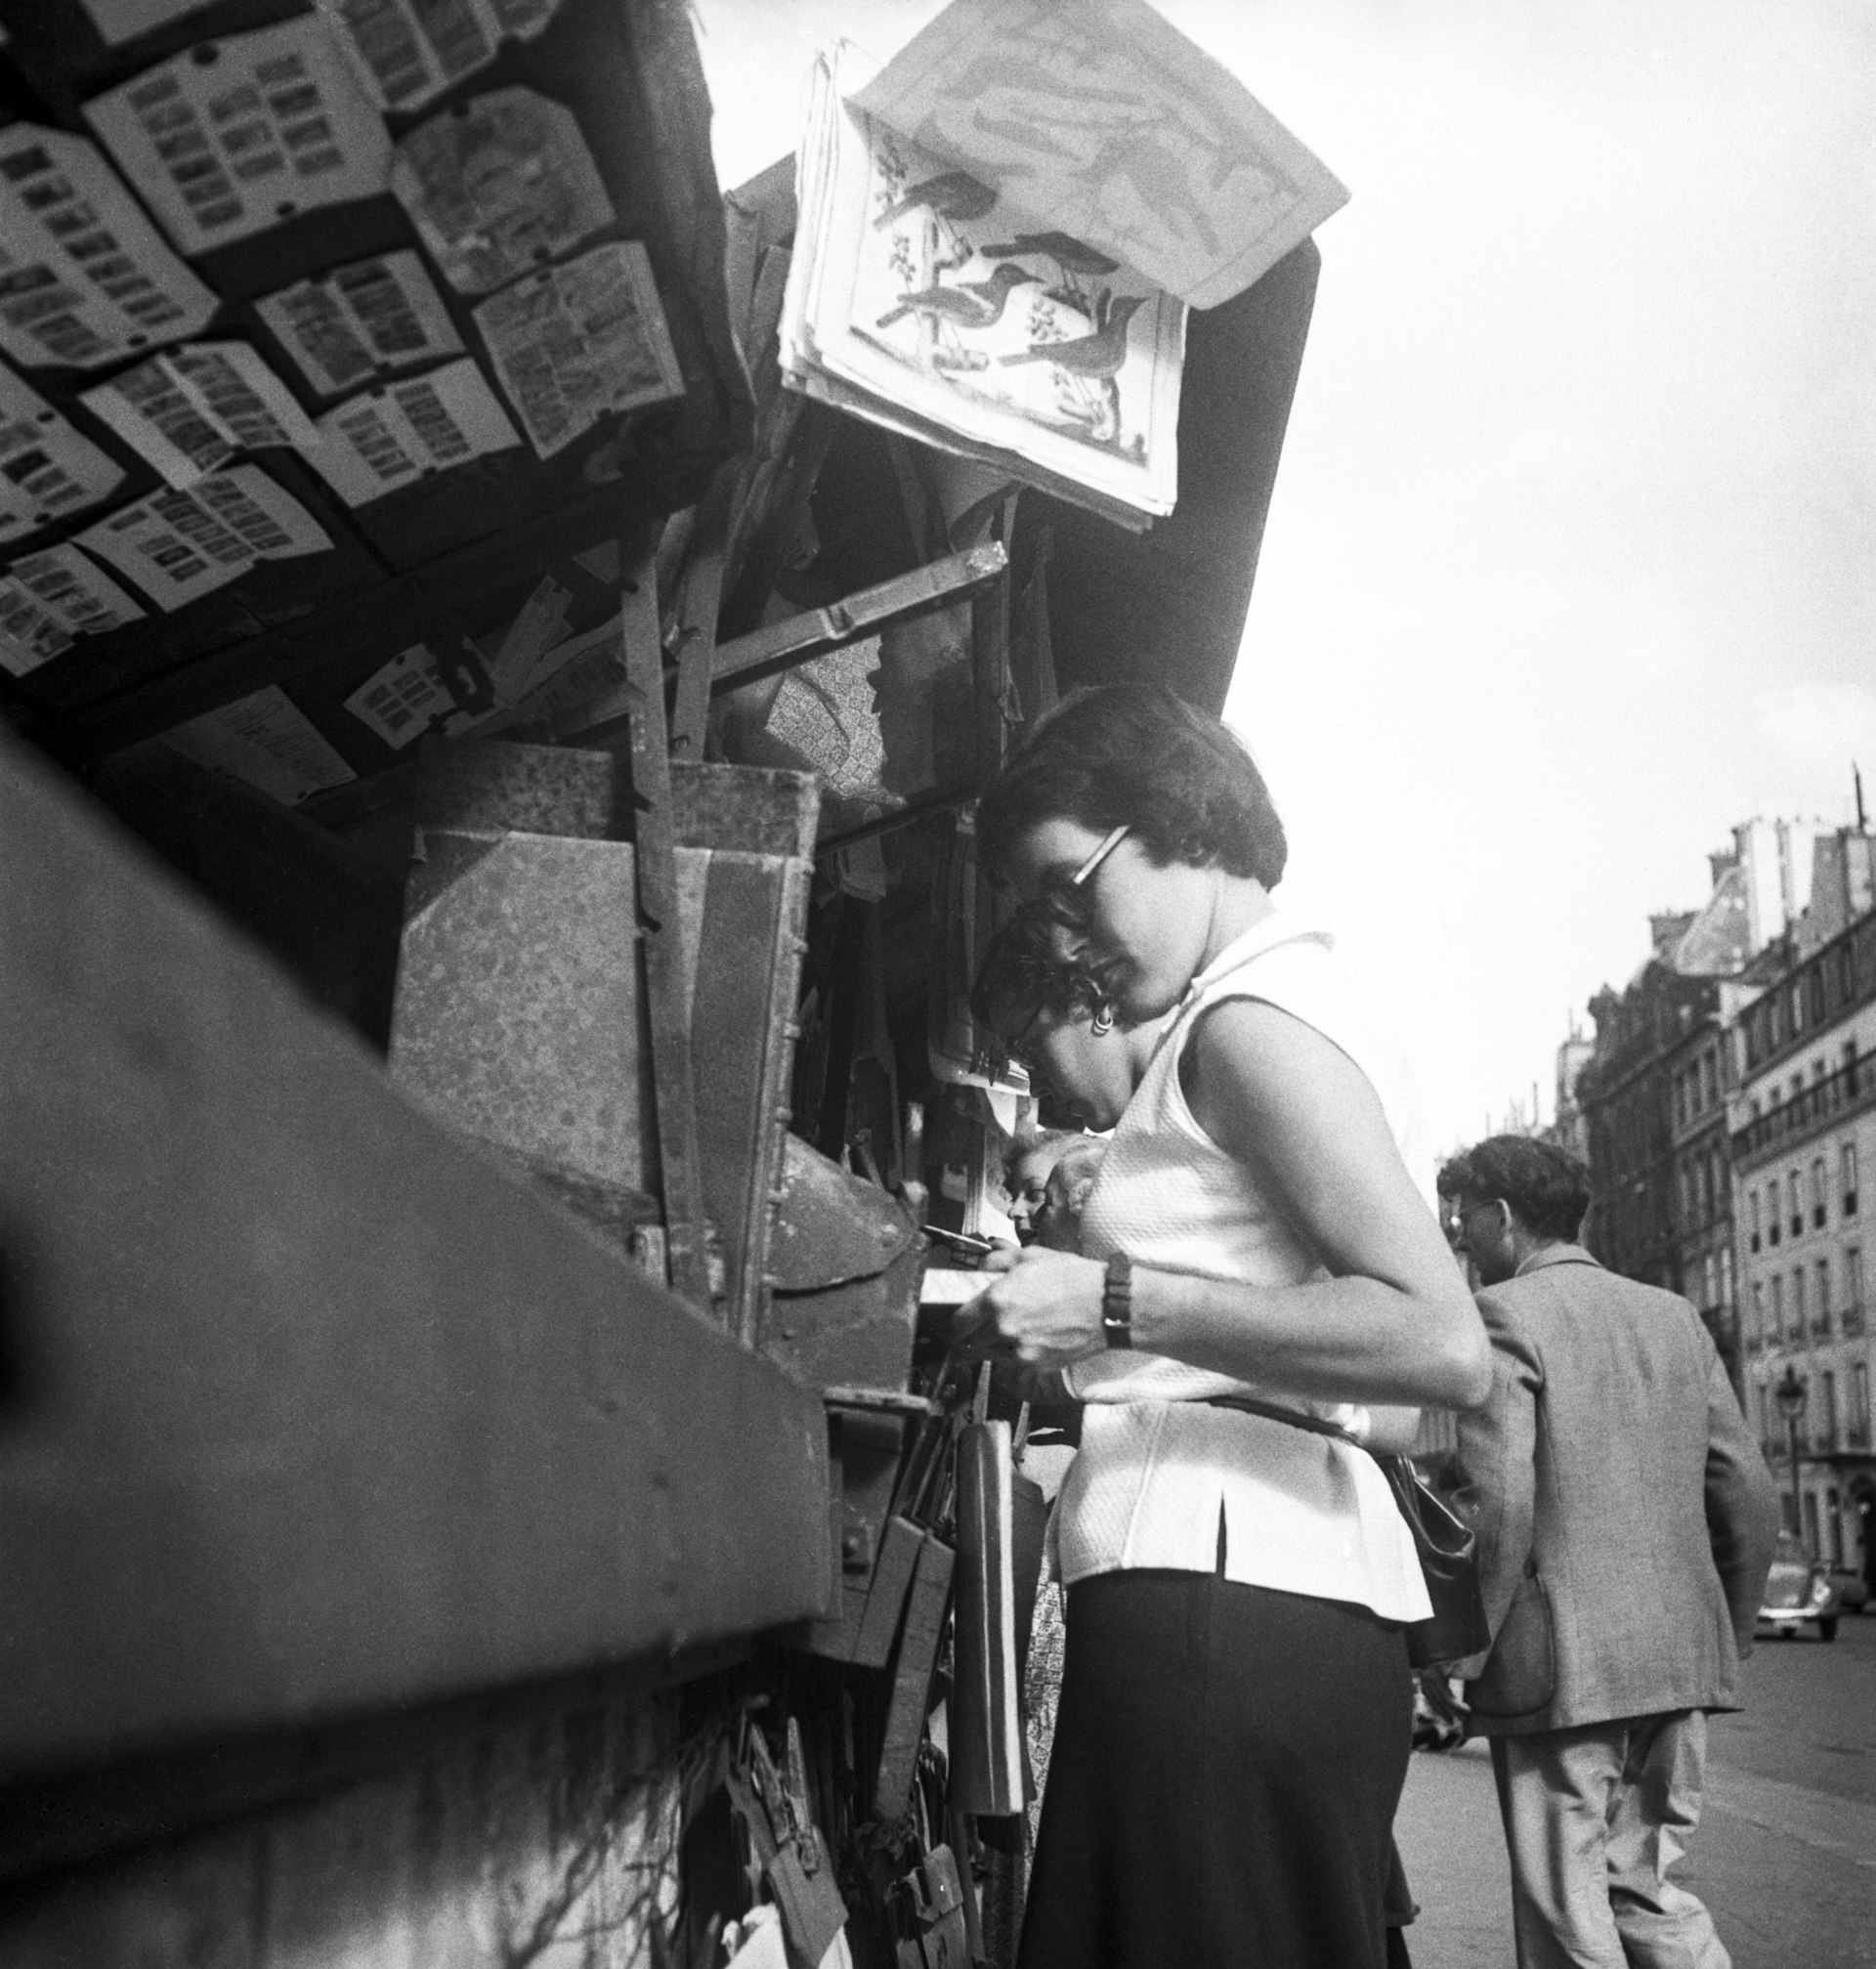 A woman browsing the bookstalls by the Seine in 1951